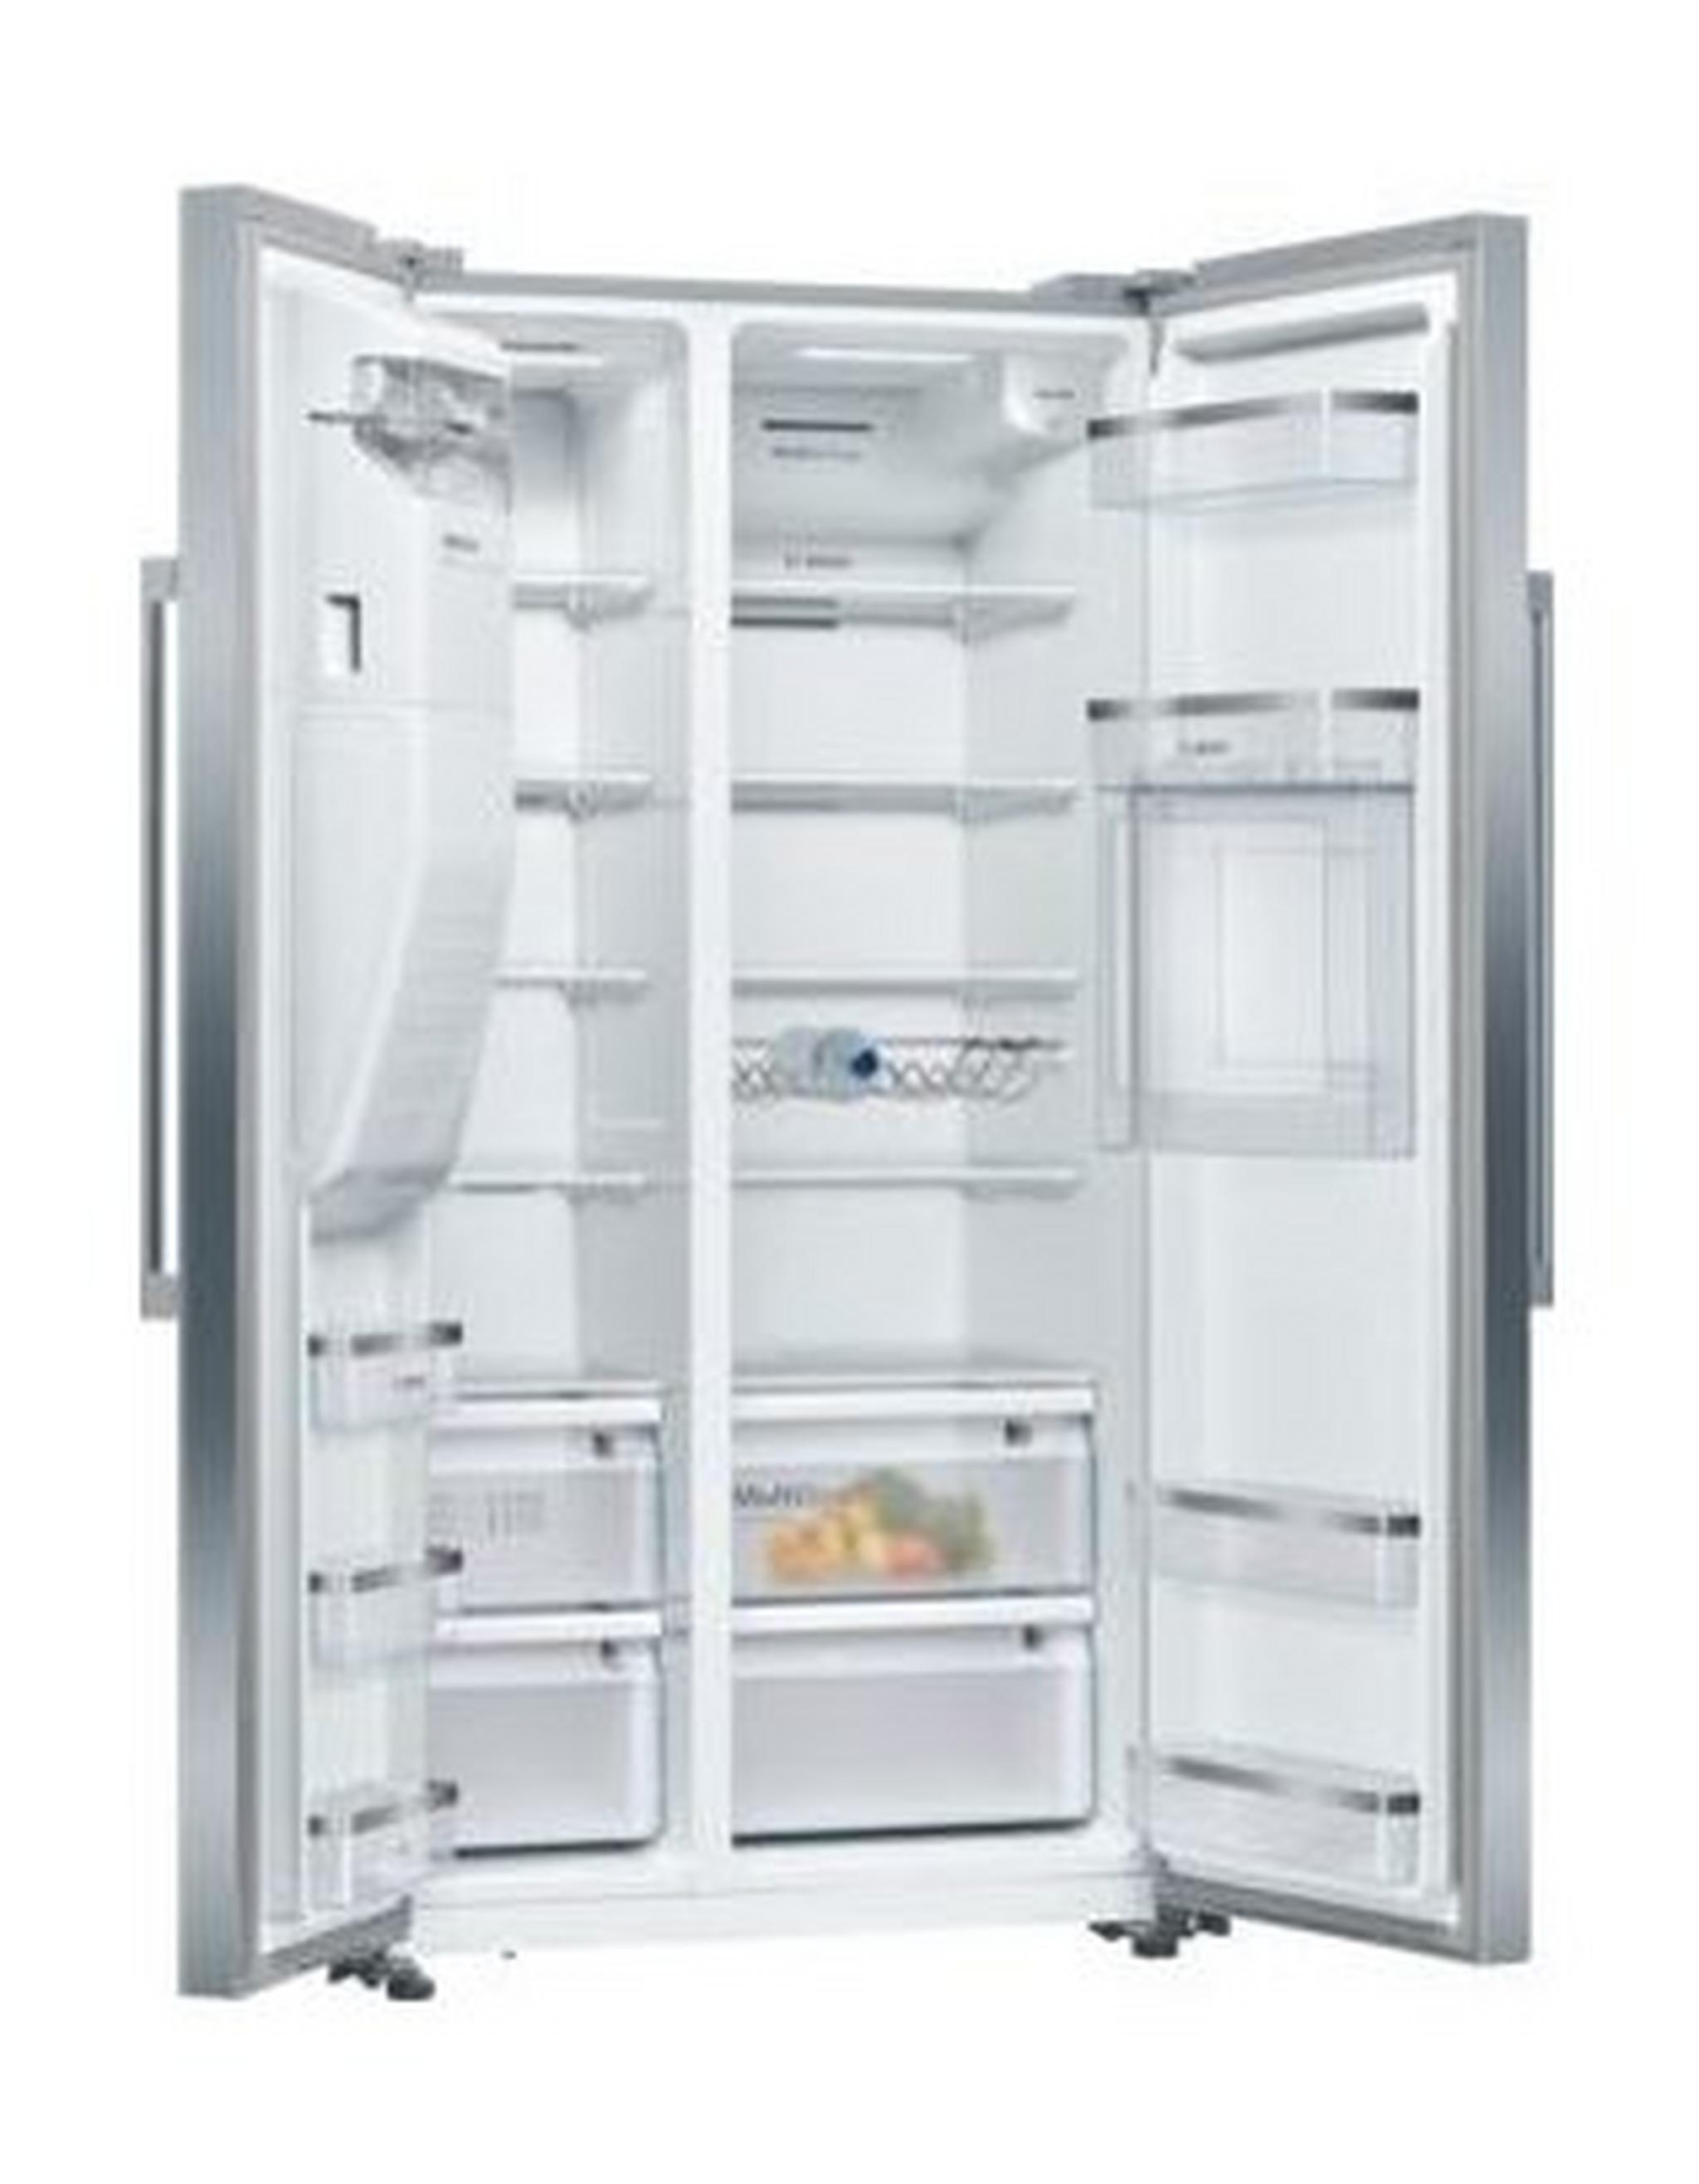 Bosch 21CFT Side By Side Refrigerator and Freezer (KAG93AI30M ) - Stainless Steel